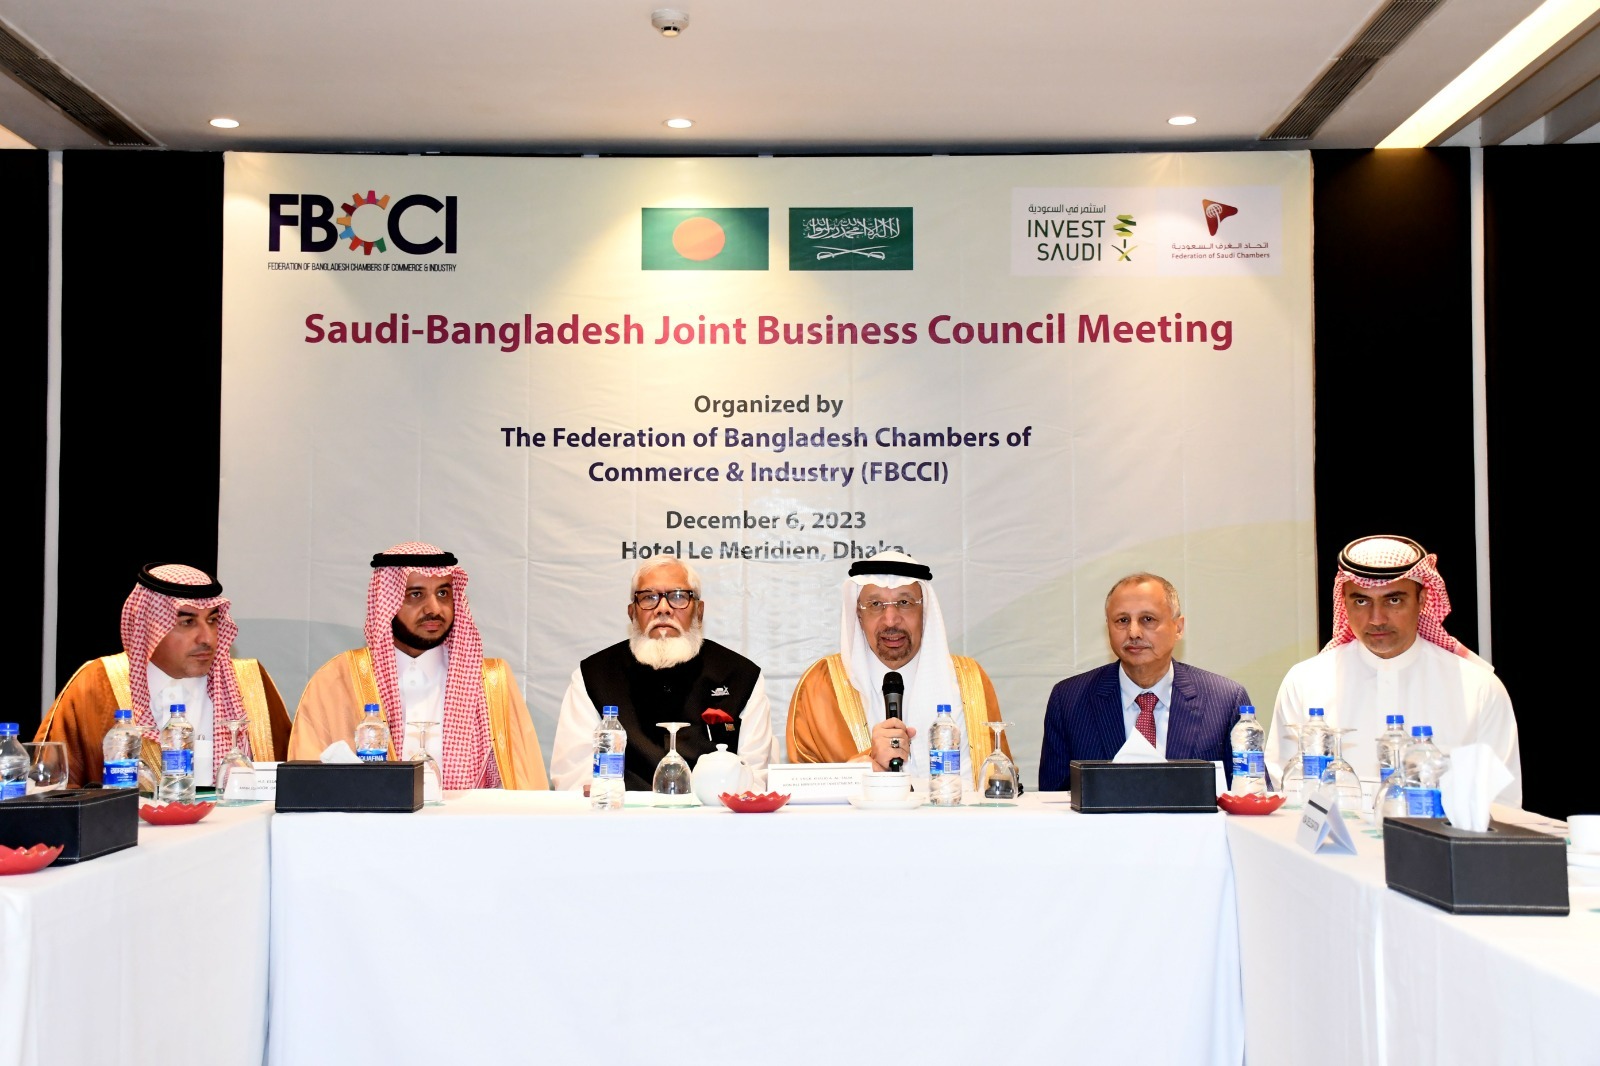 Saudi Arabia Vows to enhance trade in Food, Energy, Logistics and Manufacturing with Bangladesh